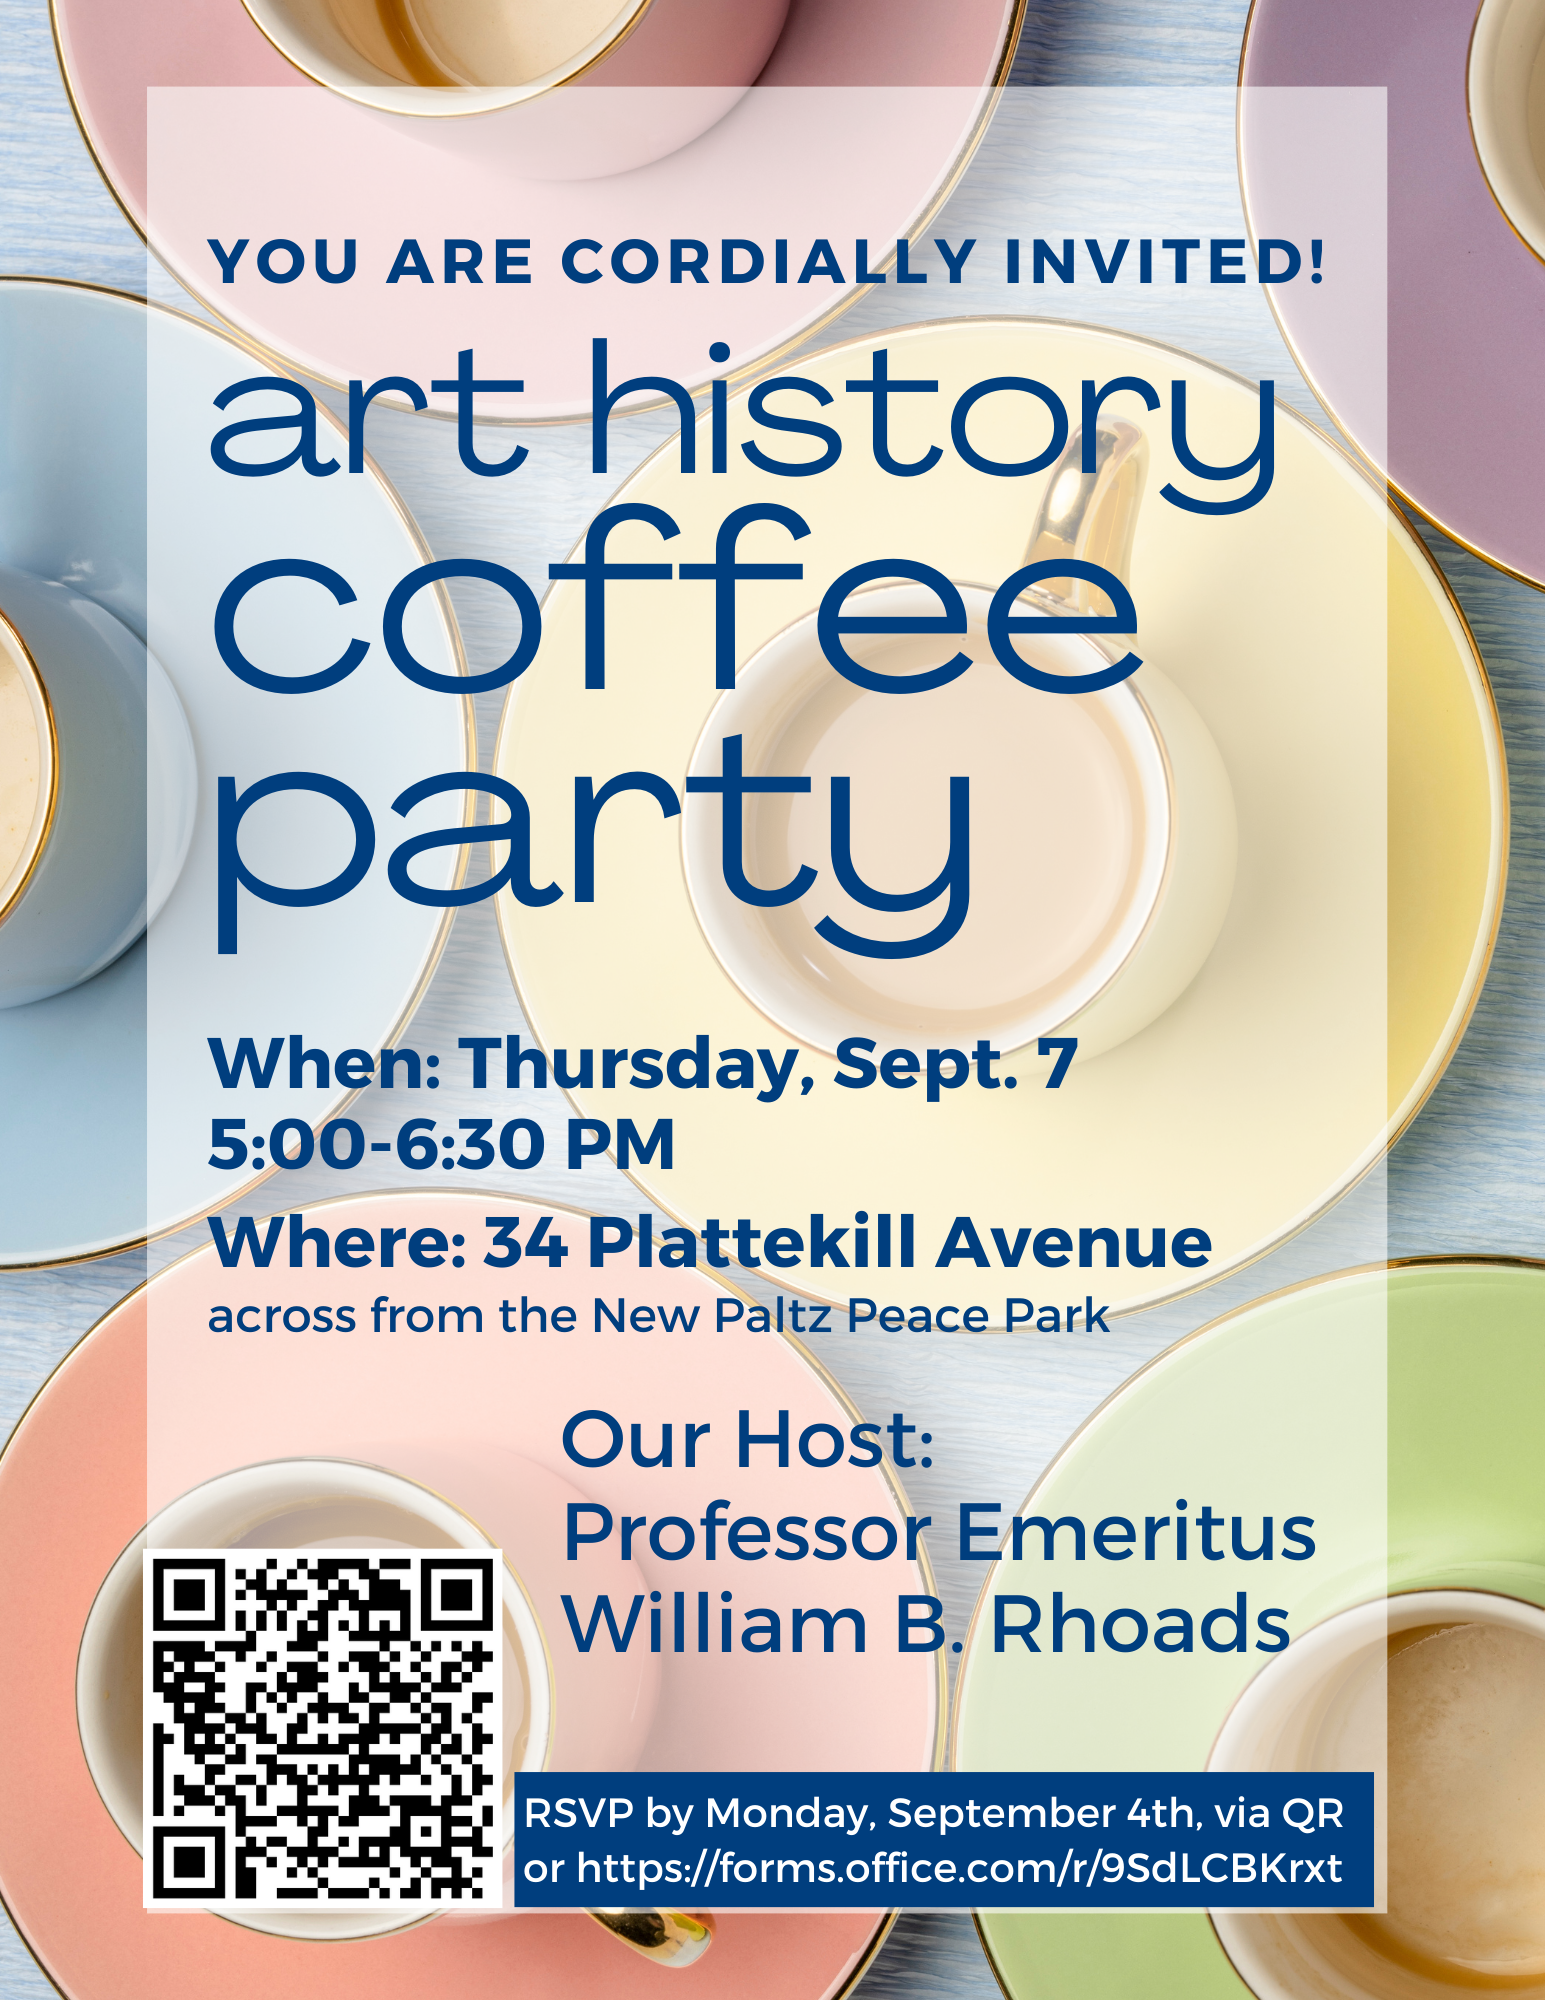 flyer for Art History Coffee Party on Thursday, September 7, 5PM at the home of Professor